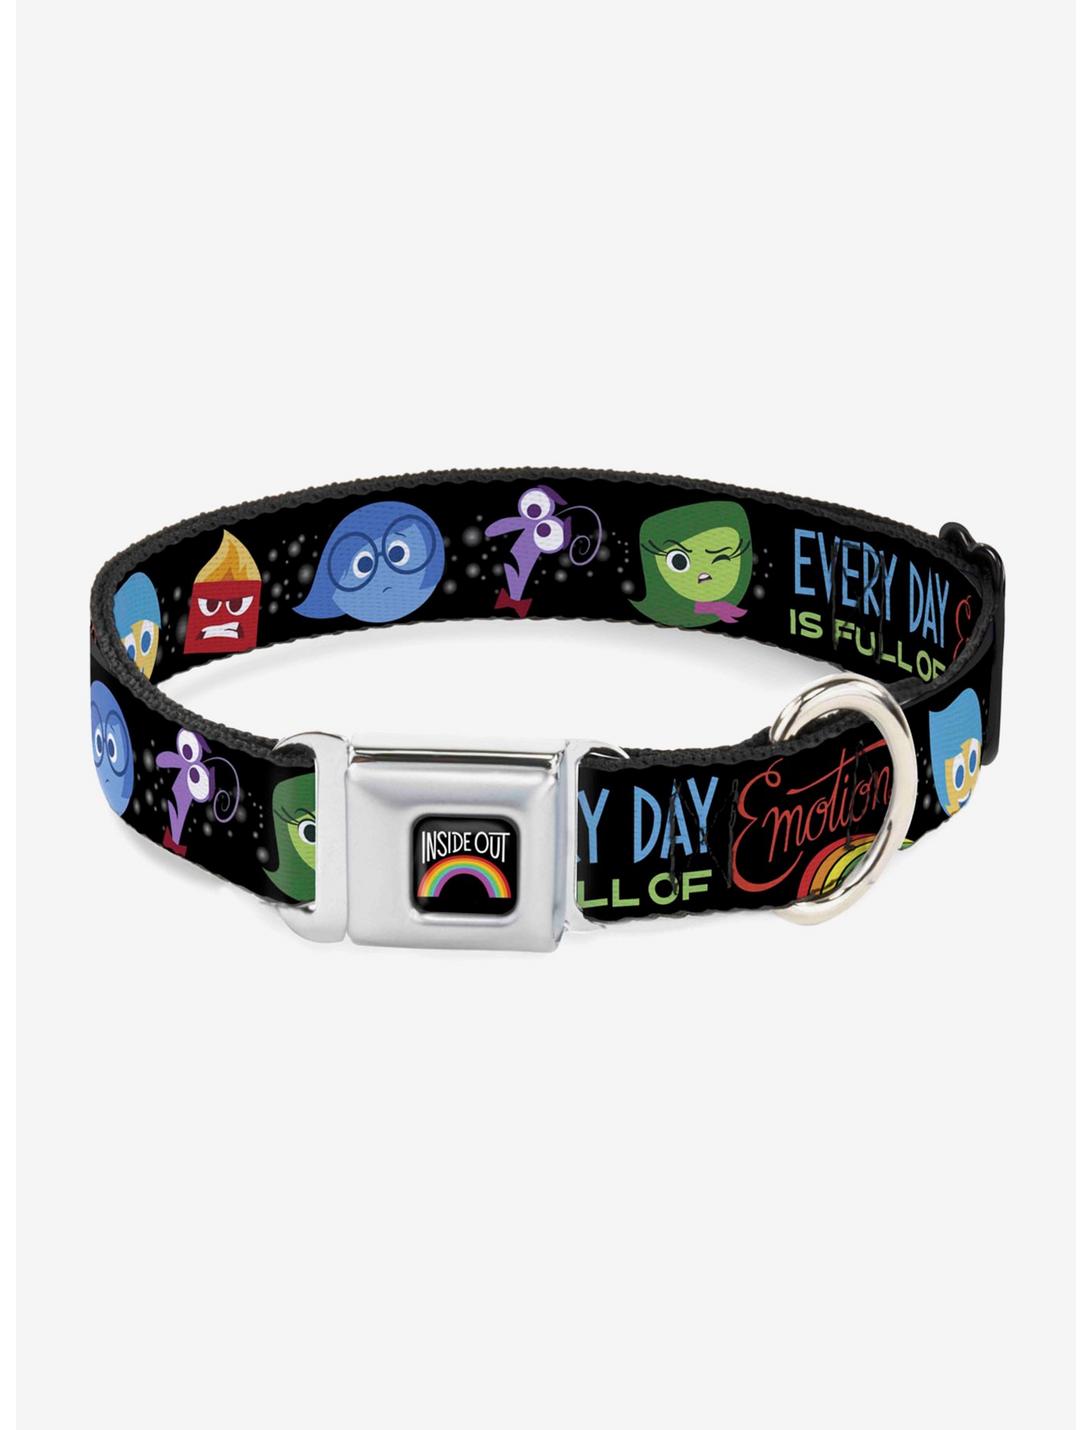 Disney Pixar Inside Out Emotion Expressions Every Day Is Full Of Emotions Seatbelt Buckle Pet Collar, MULTICOLOR, hi-res